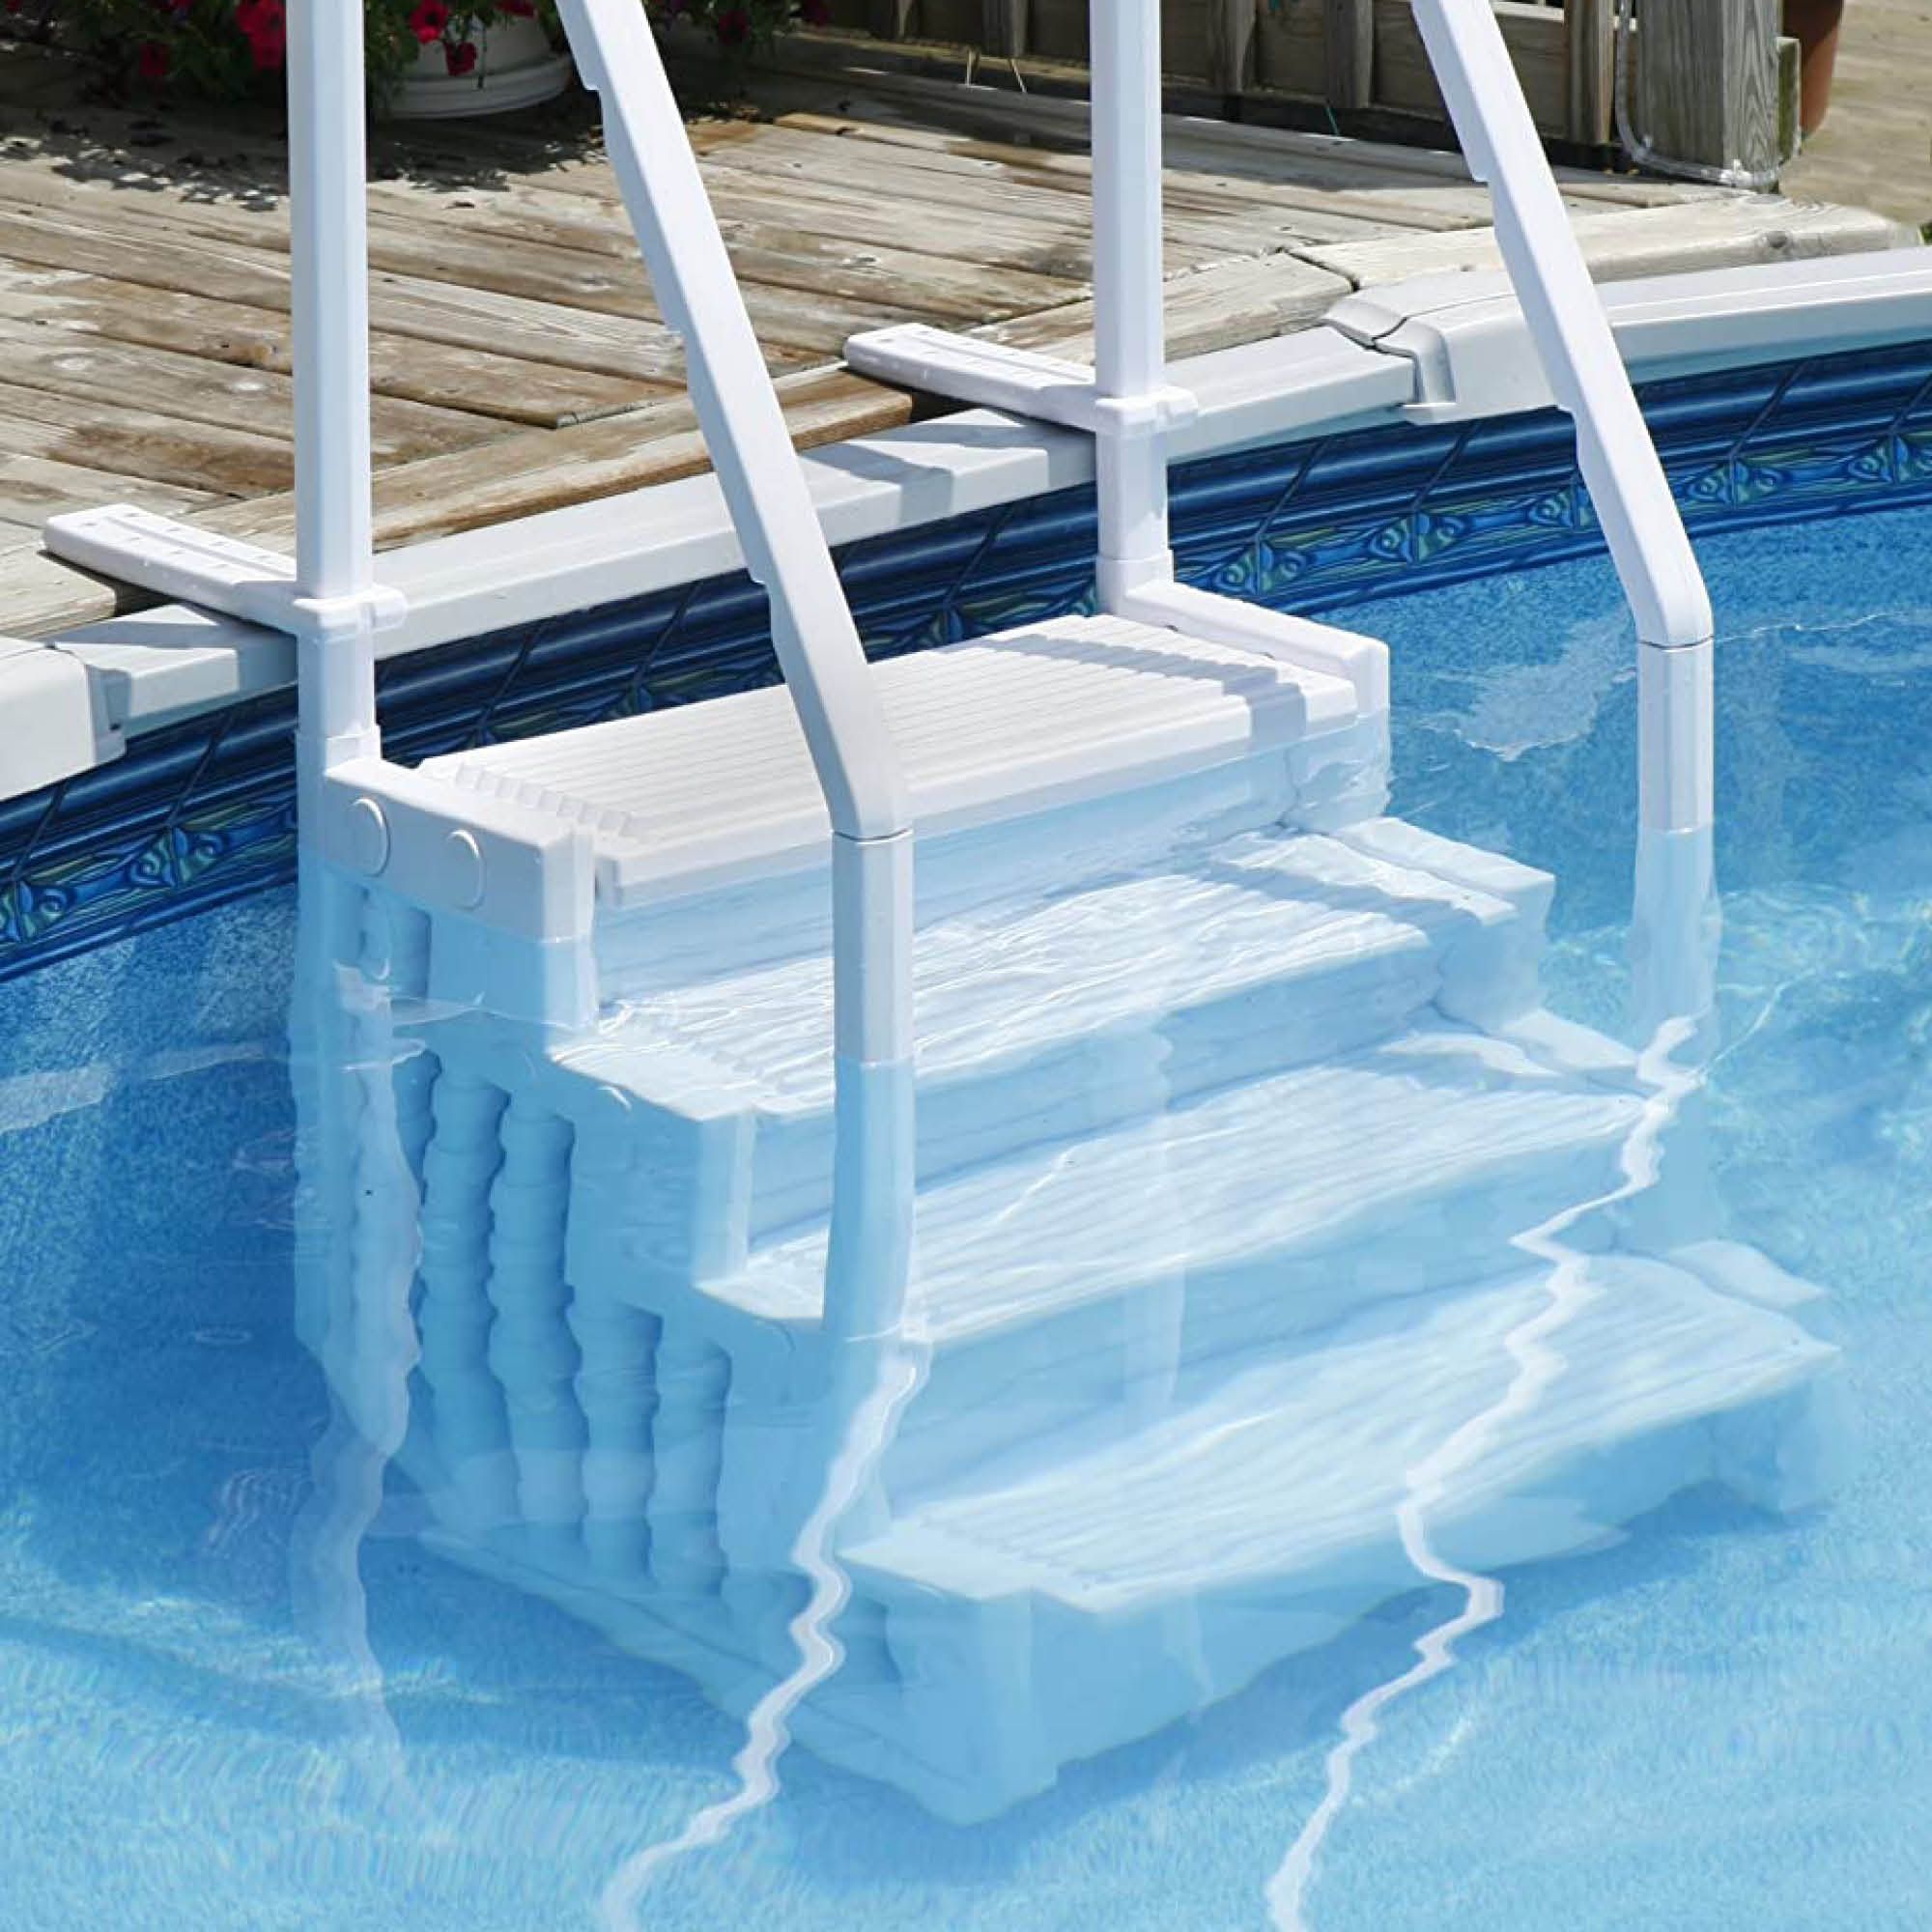 66.9，Weight Capability 220.46 lbs vidaXL Dock Ladder/Swimming Pool Ladder/Removable Boarding Boat Ladder for In Ground Pools Duty 4-Step Aluminum Pool Step Ladder with Easy Mount 